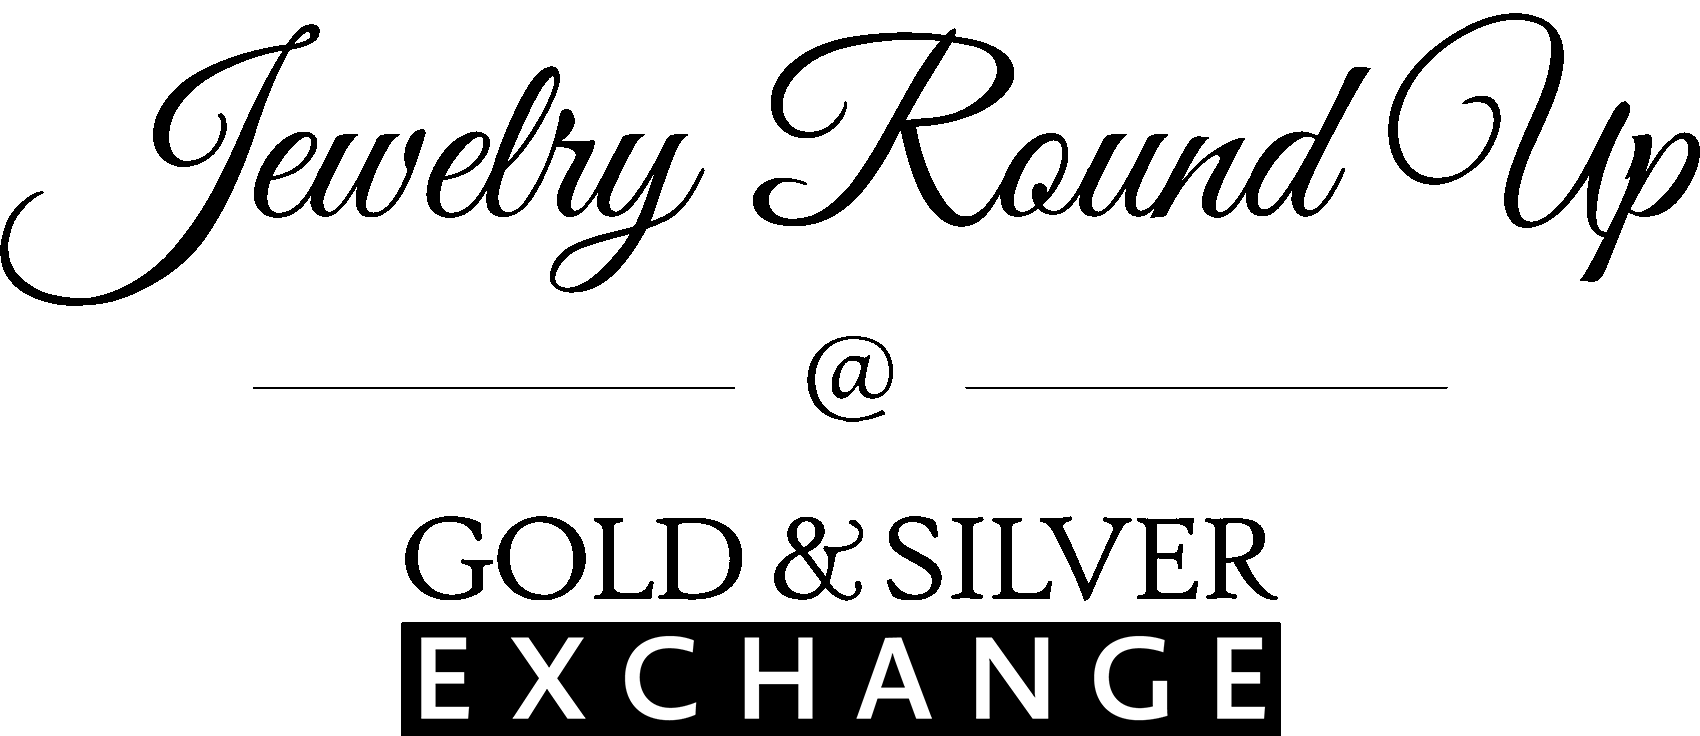 Gold and Silver Exchange NM with Jewelry Roundup